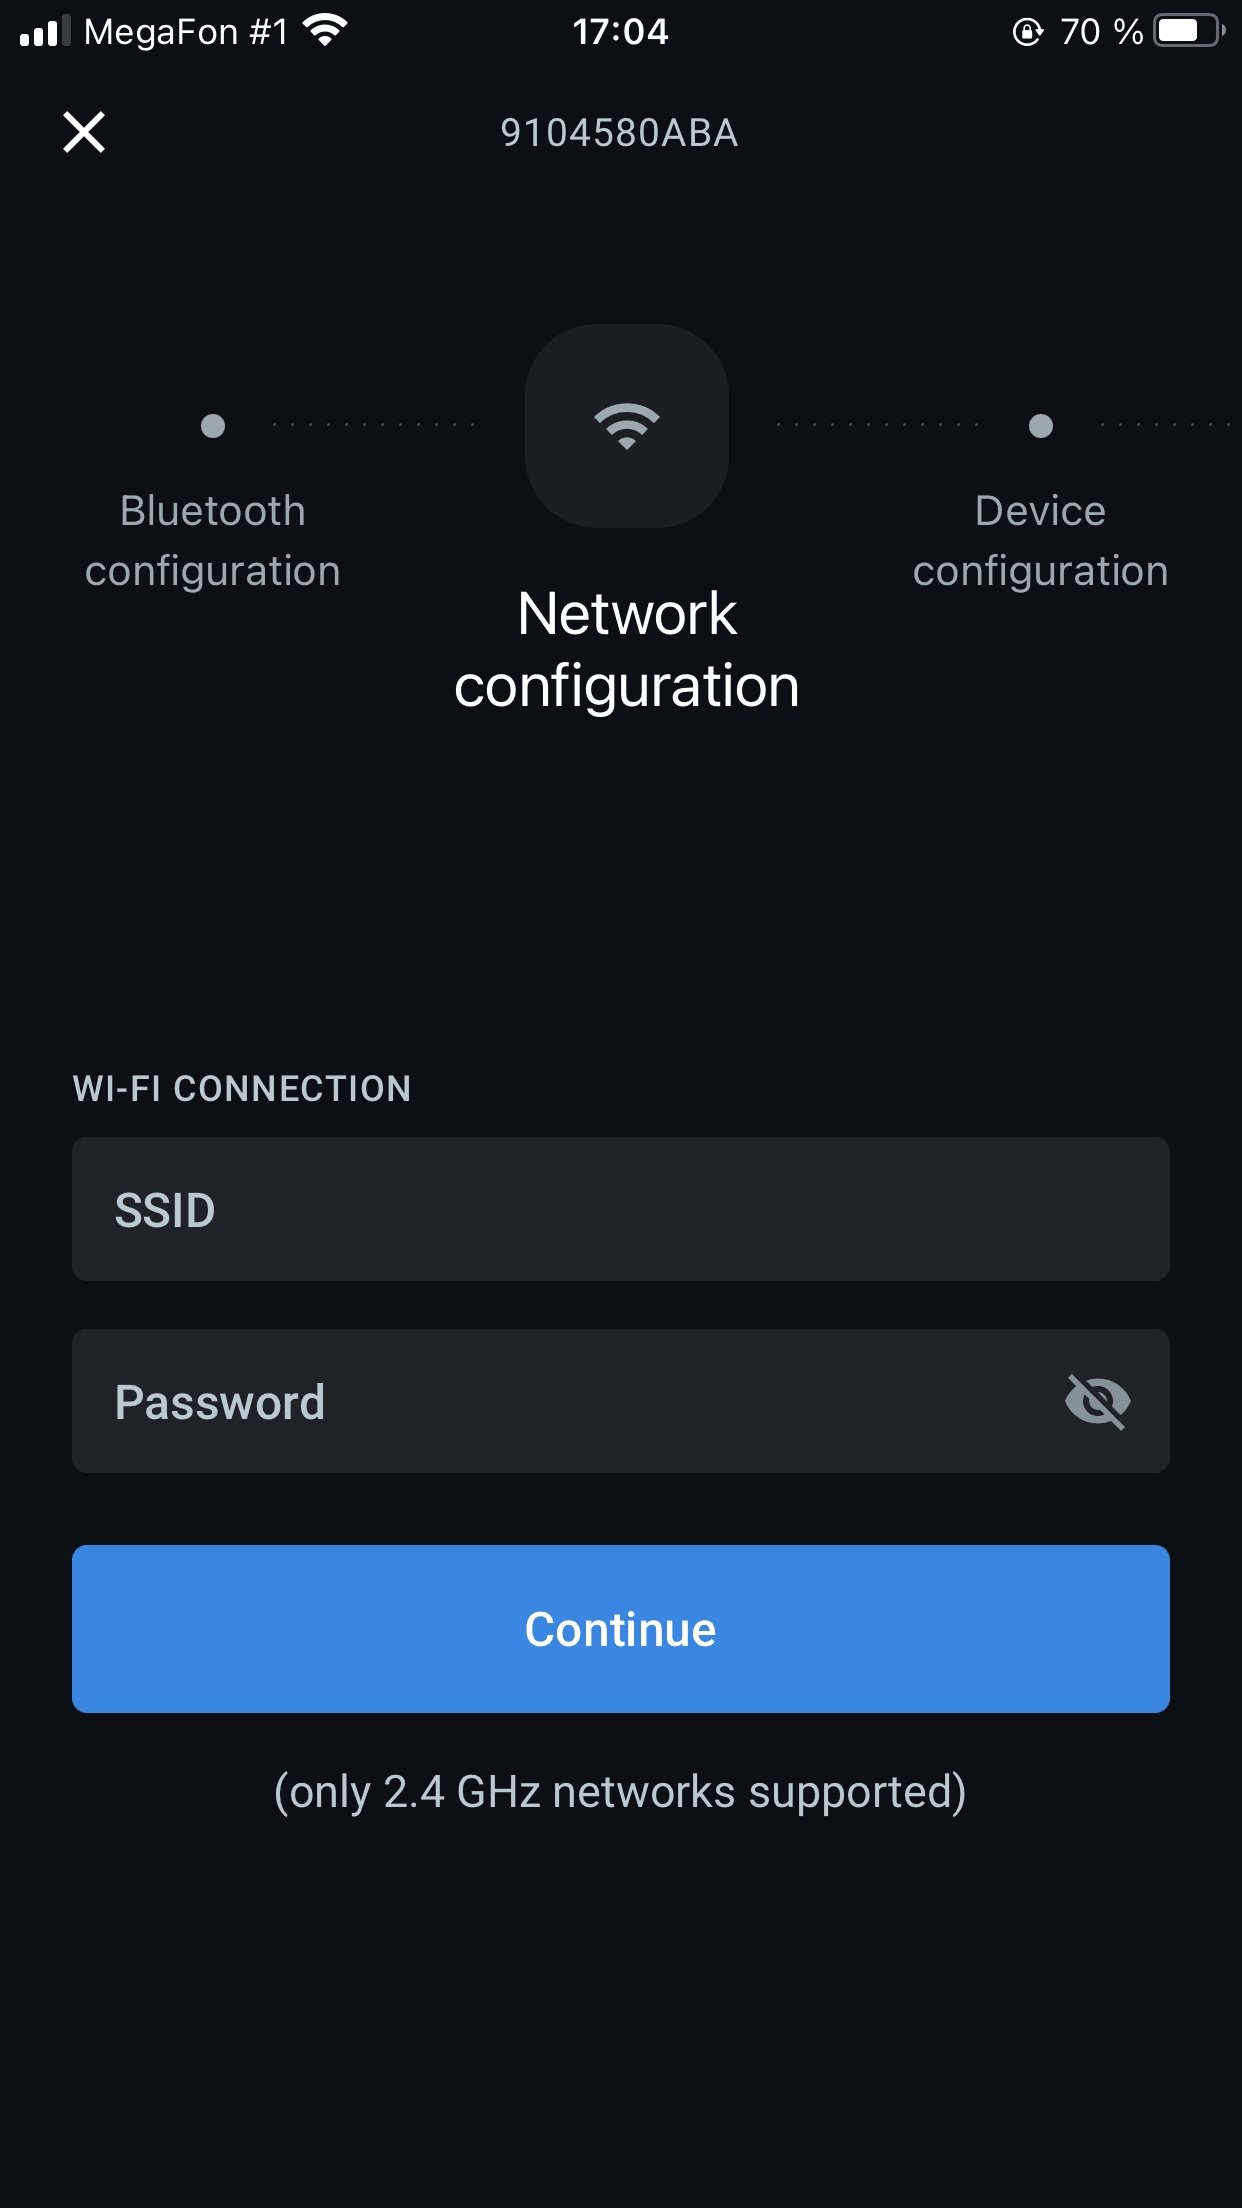 Enter Wi-Fi network SSID and password